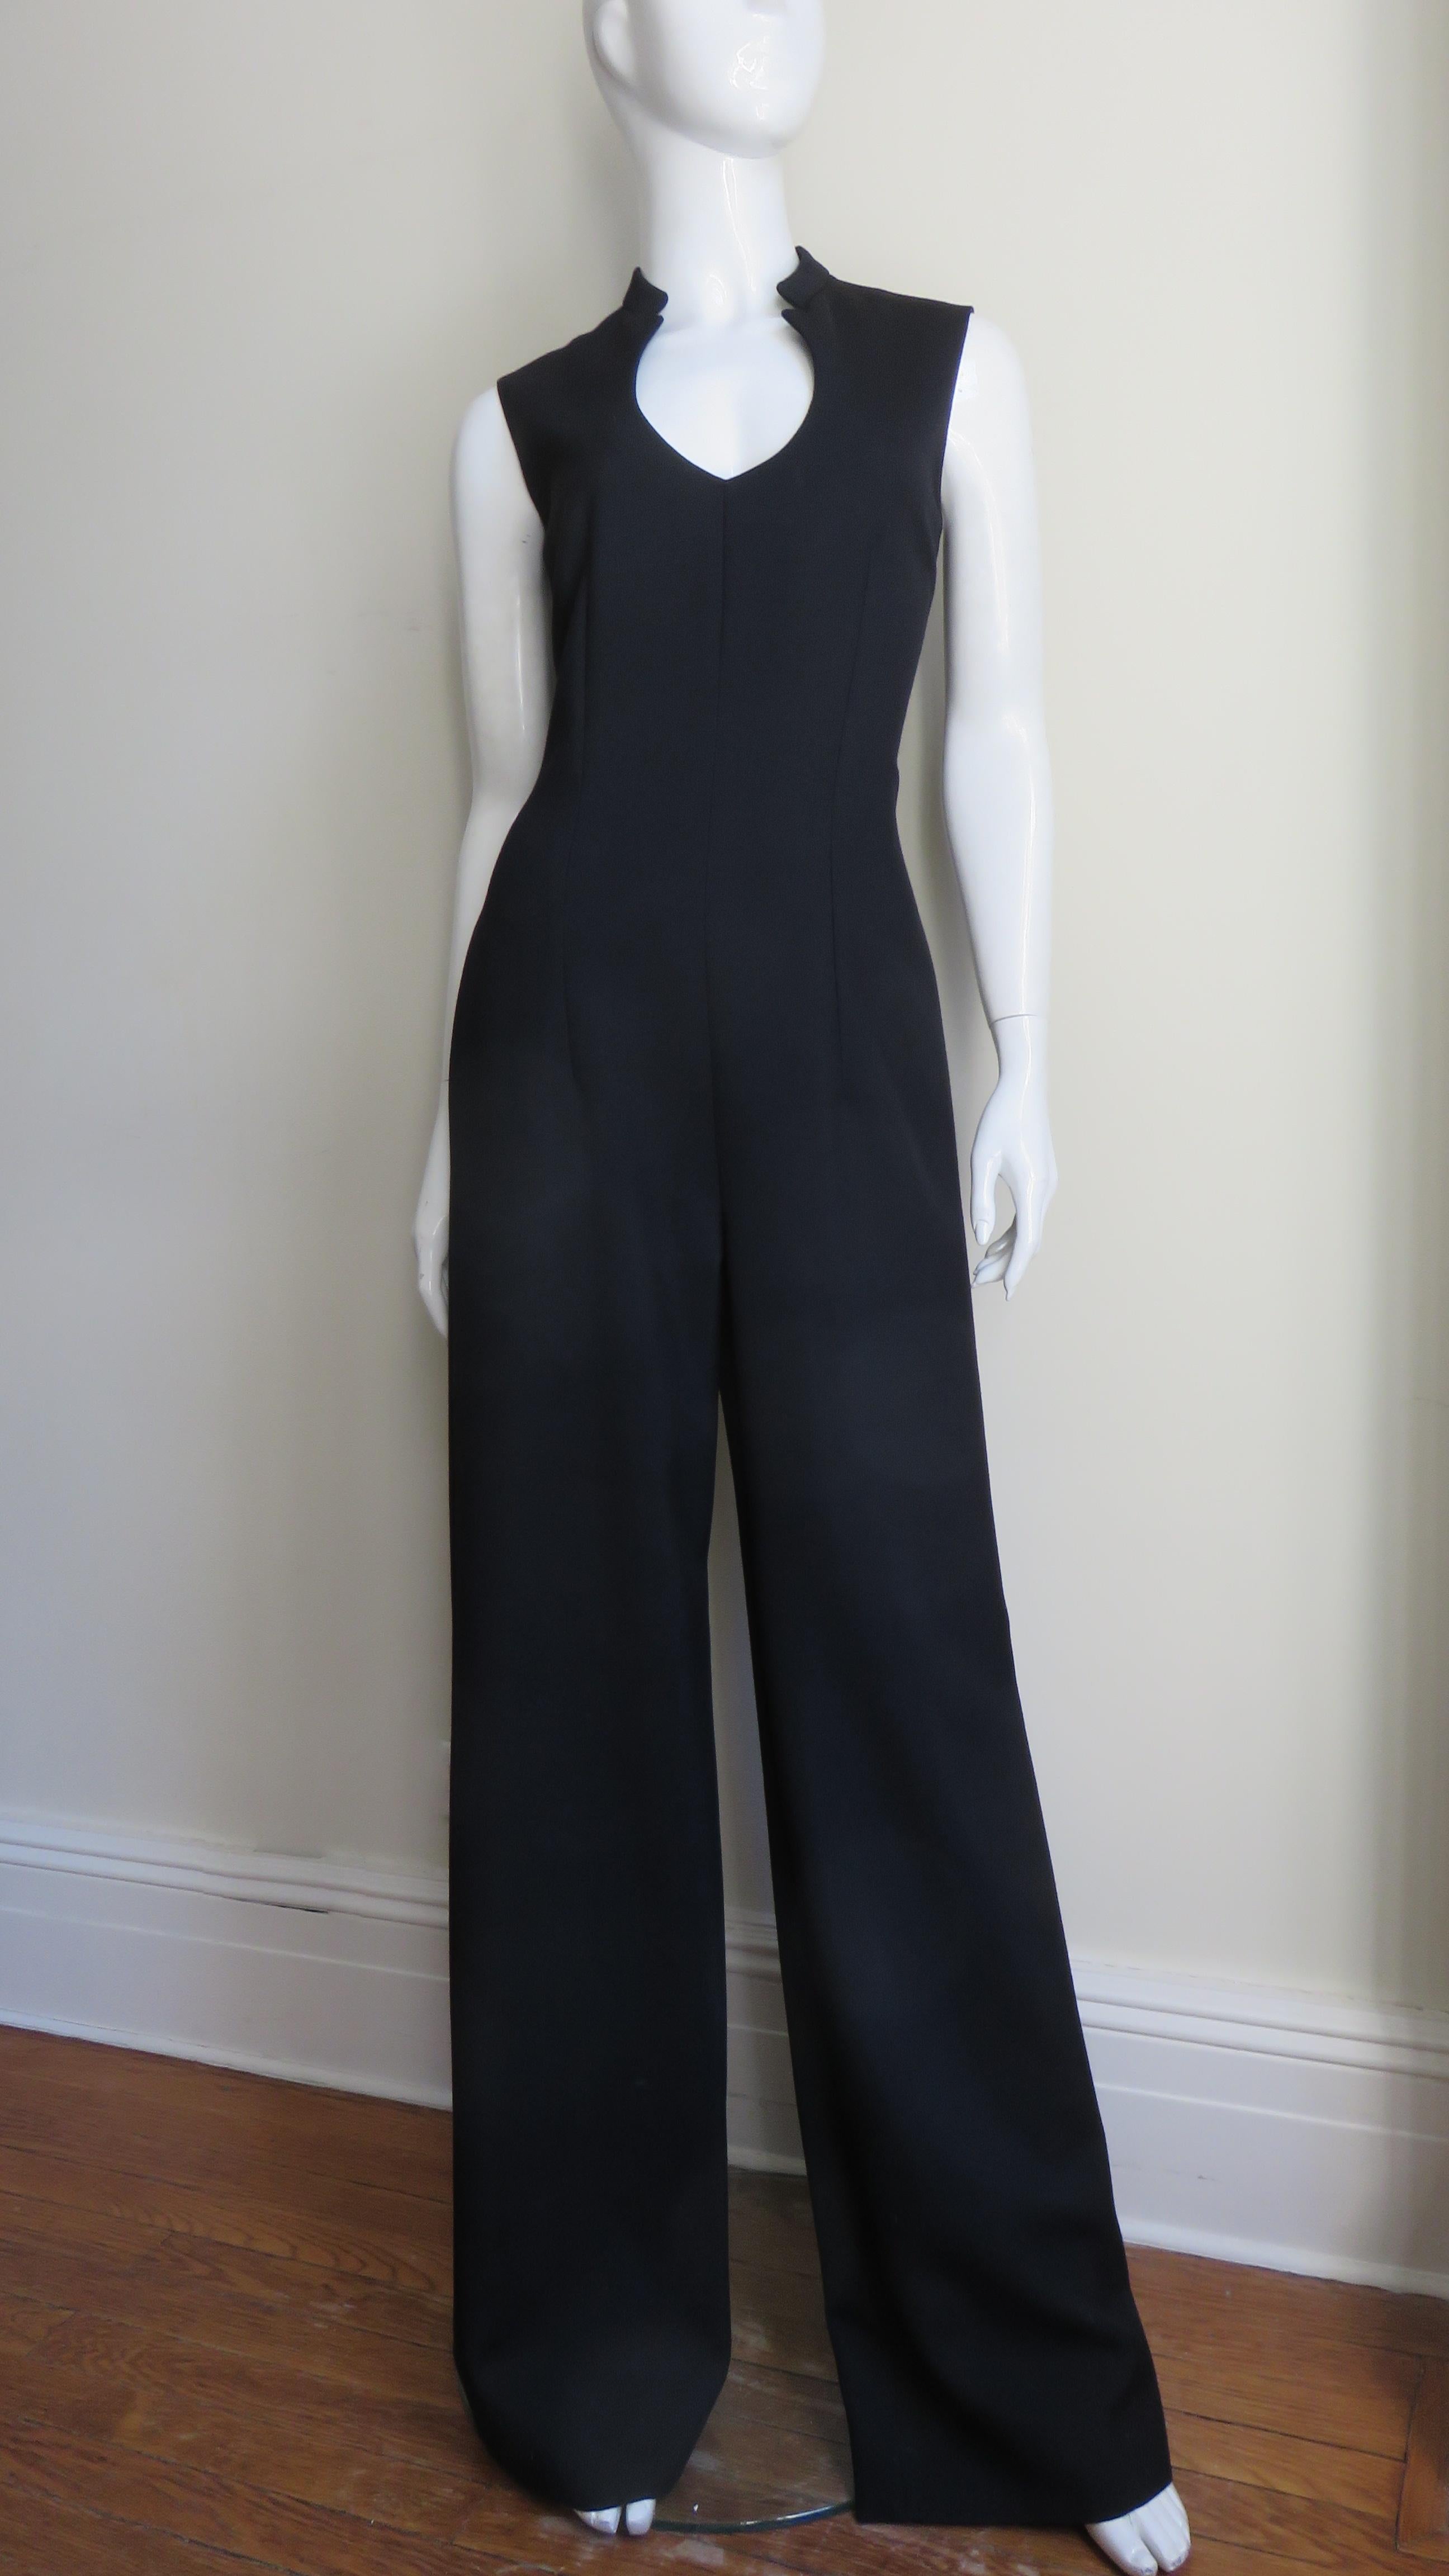 A fabulous black wool jumpsuit from the Yves St Laurent YSL A/W 2010 collection. It is sleeveless with a plunging neckline and a stand up collar. The jumpsuit is semi fitted with wide legs and a center back zipper.
Fits sizes Small, Medium. Marked